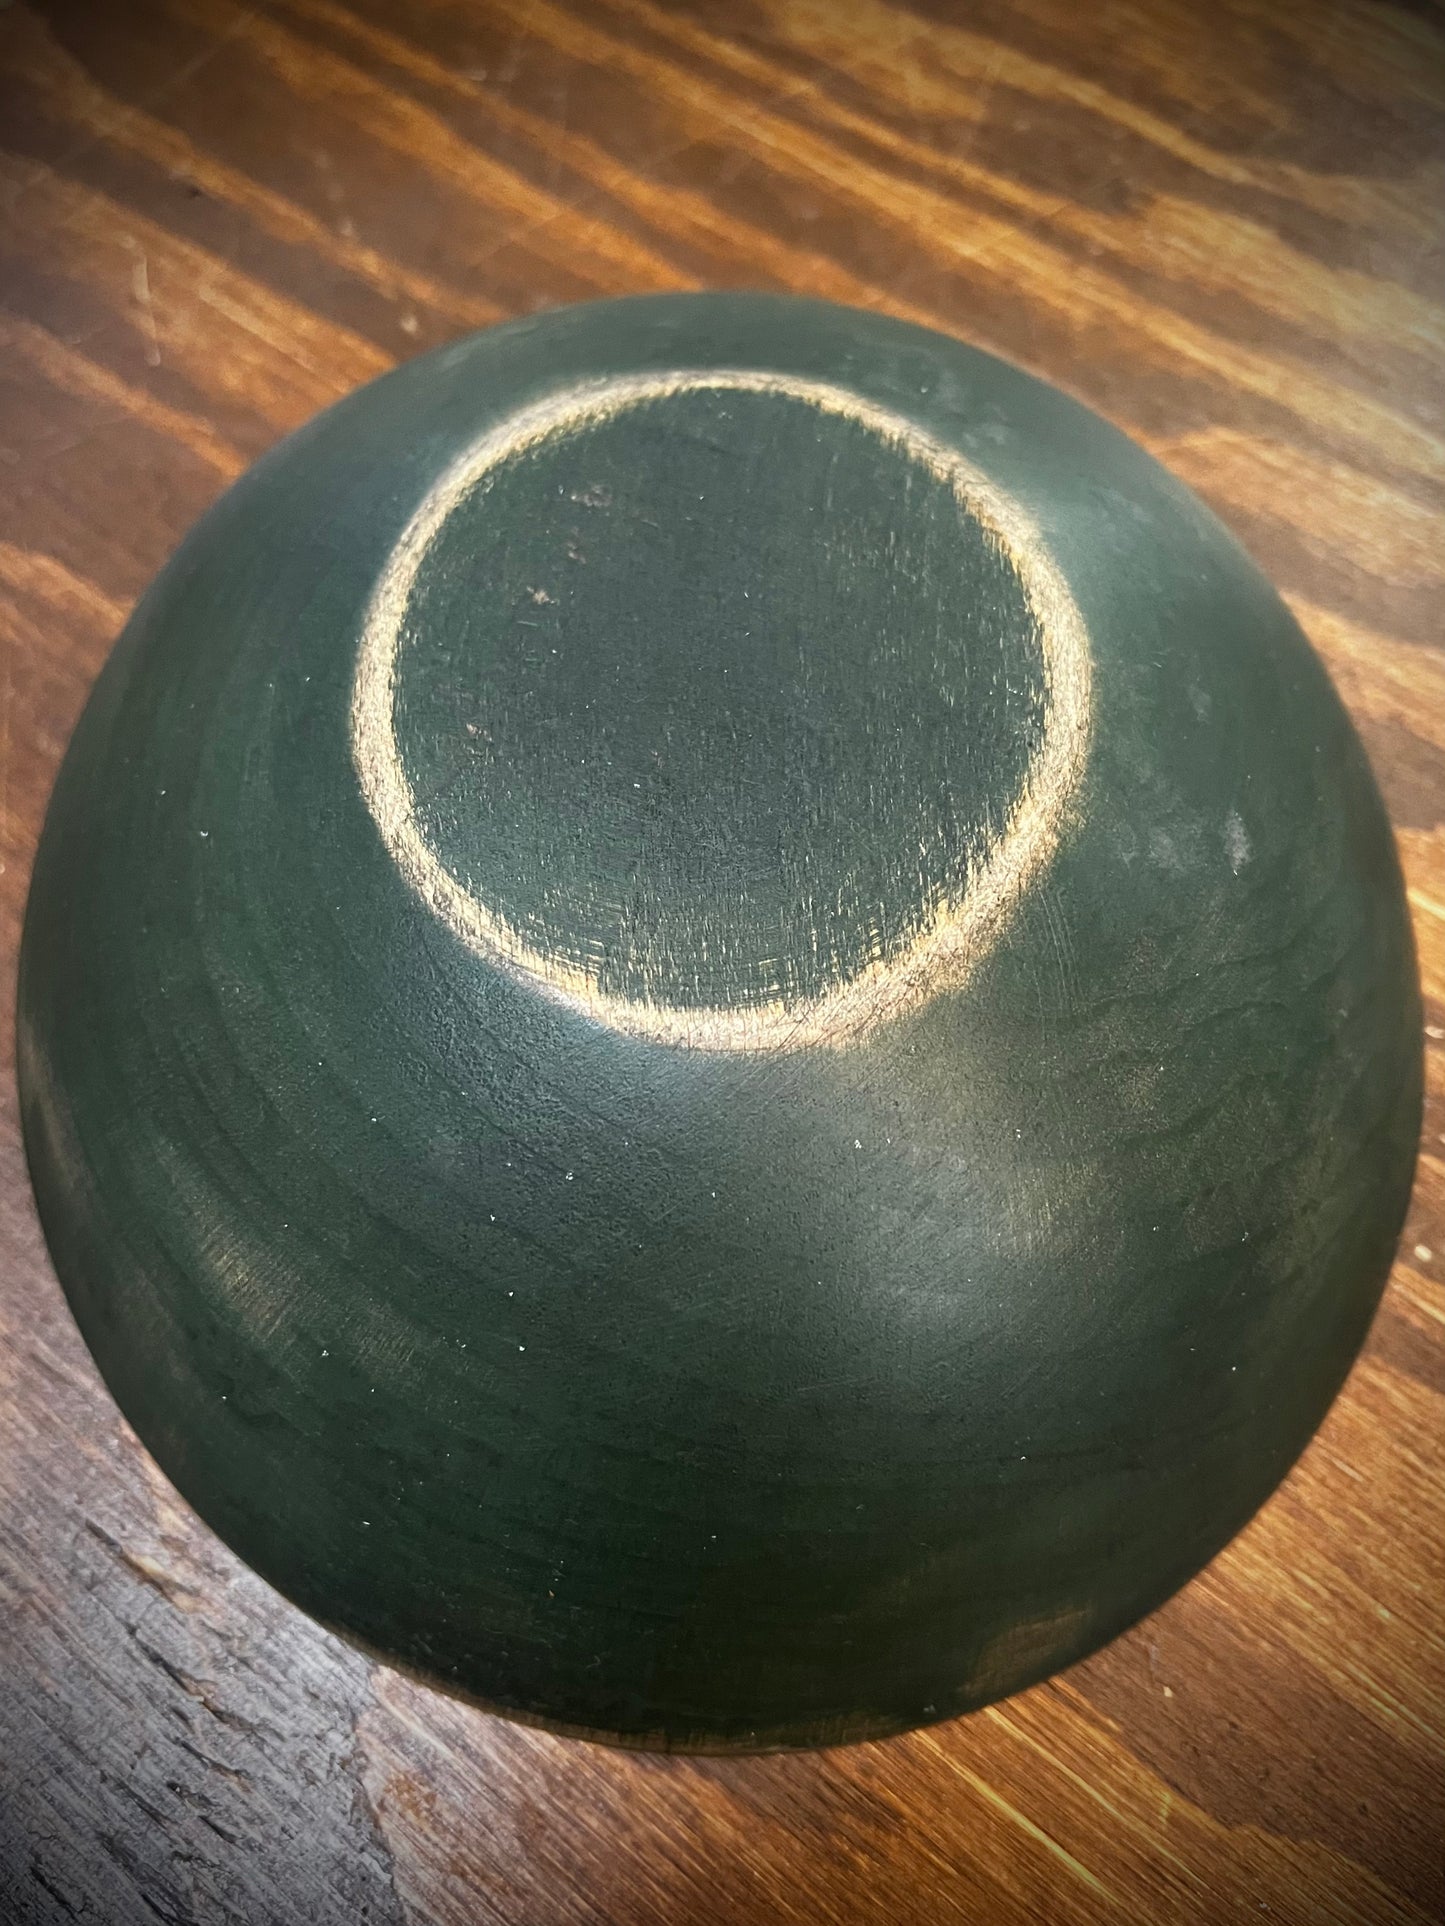 Wooden Bowl, 7.5” Round/Out of Round